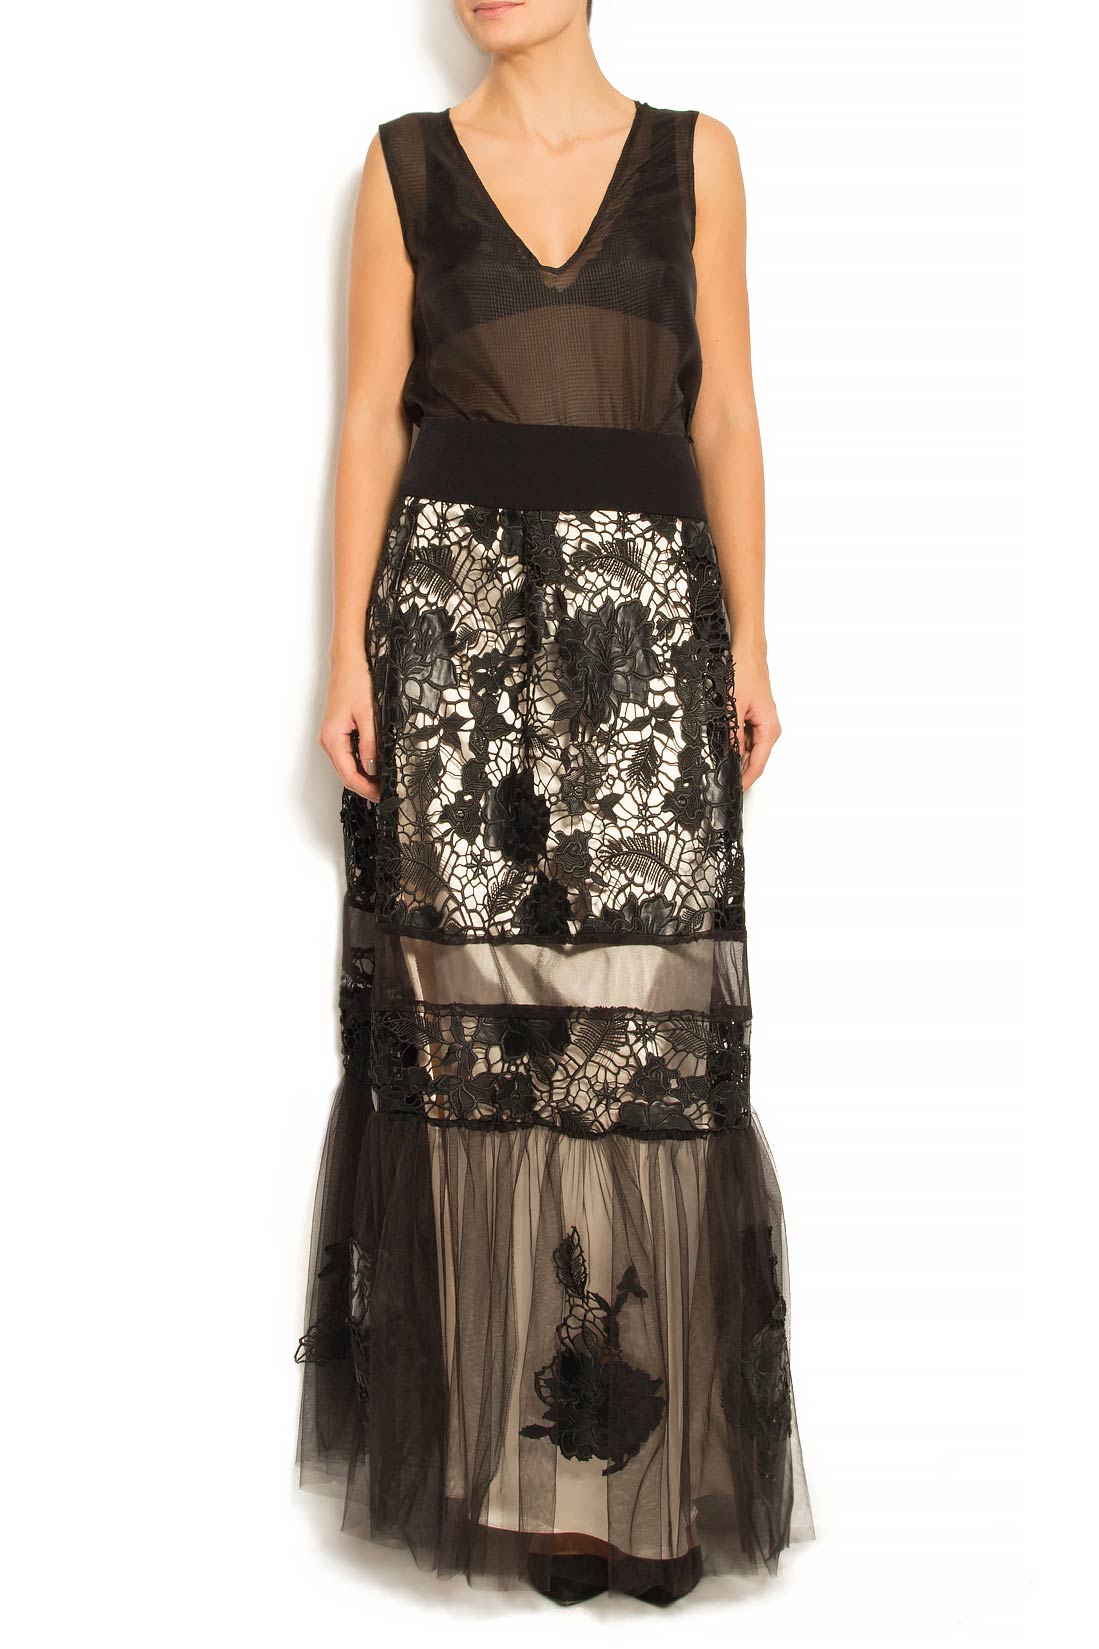 Tulle maxi skirt decorated with leather embroidery Elena Perseil image 0